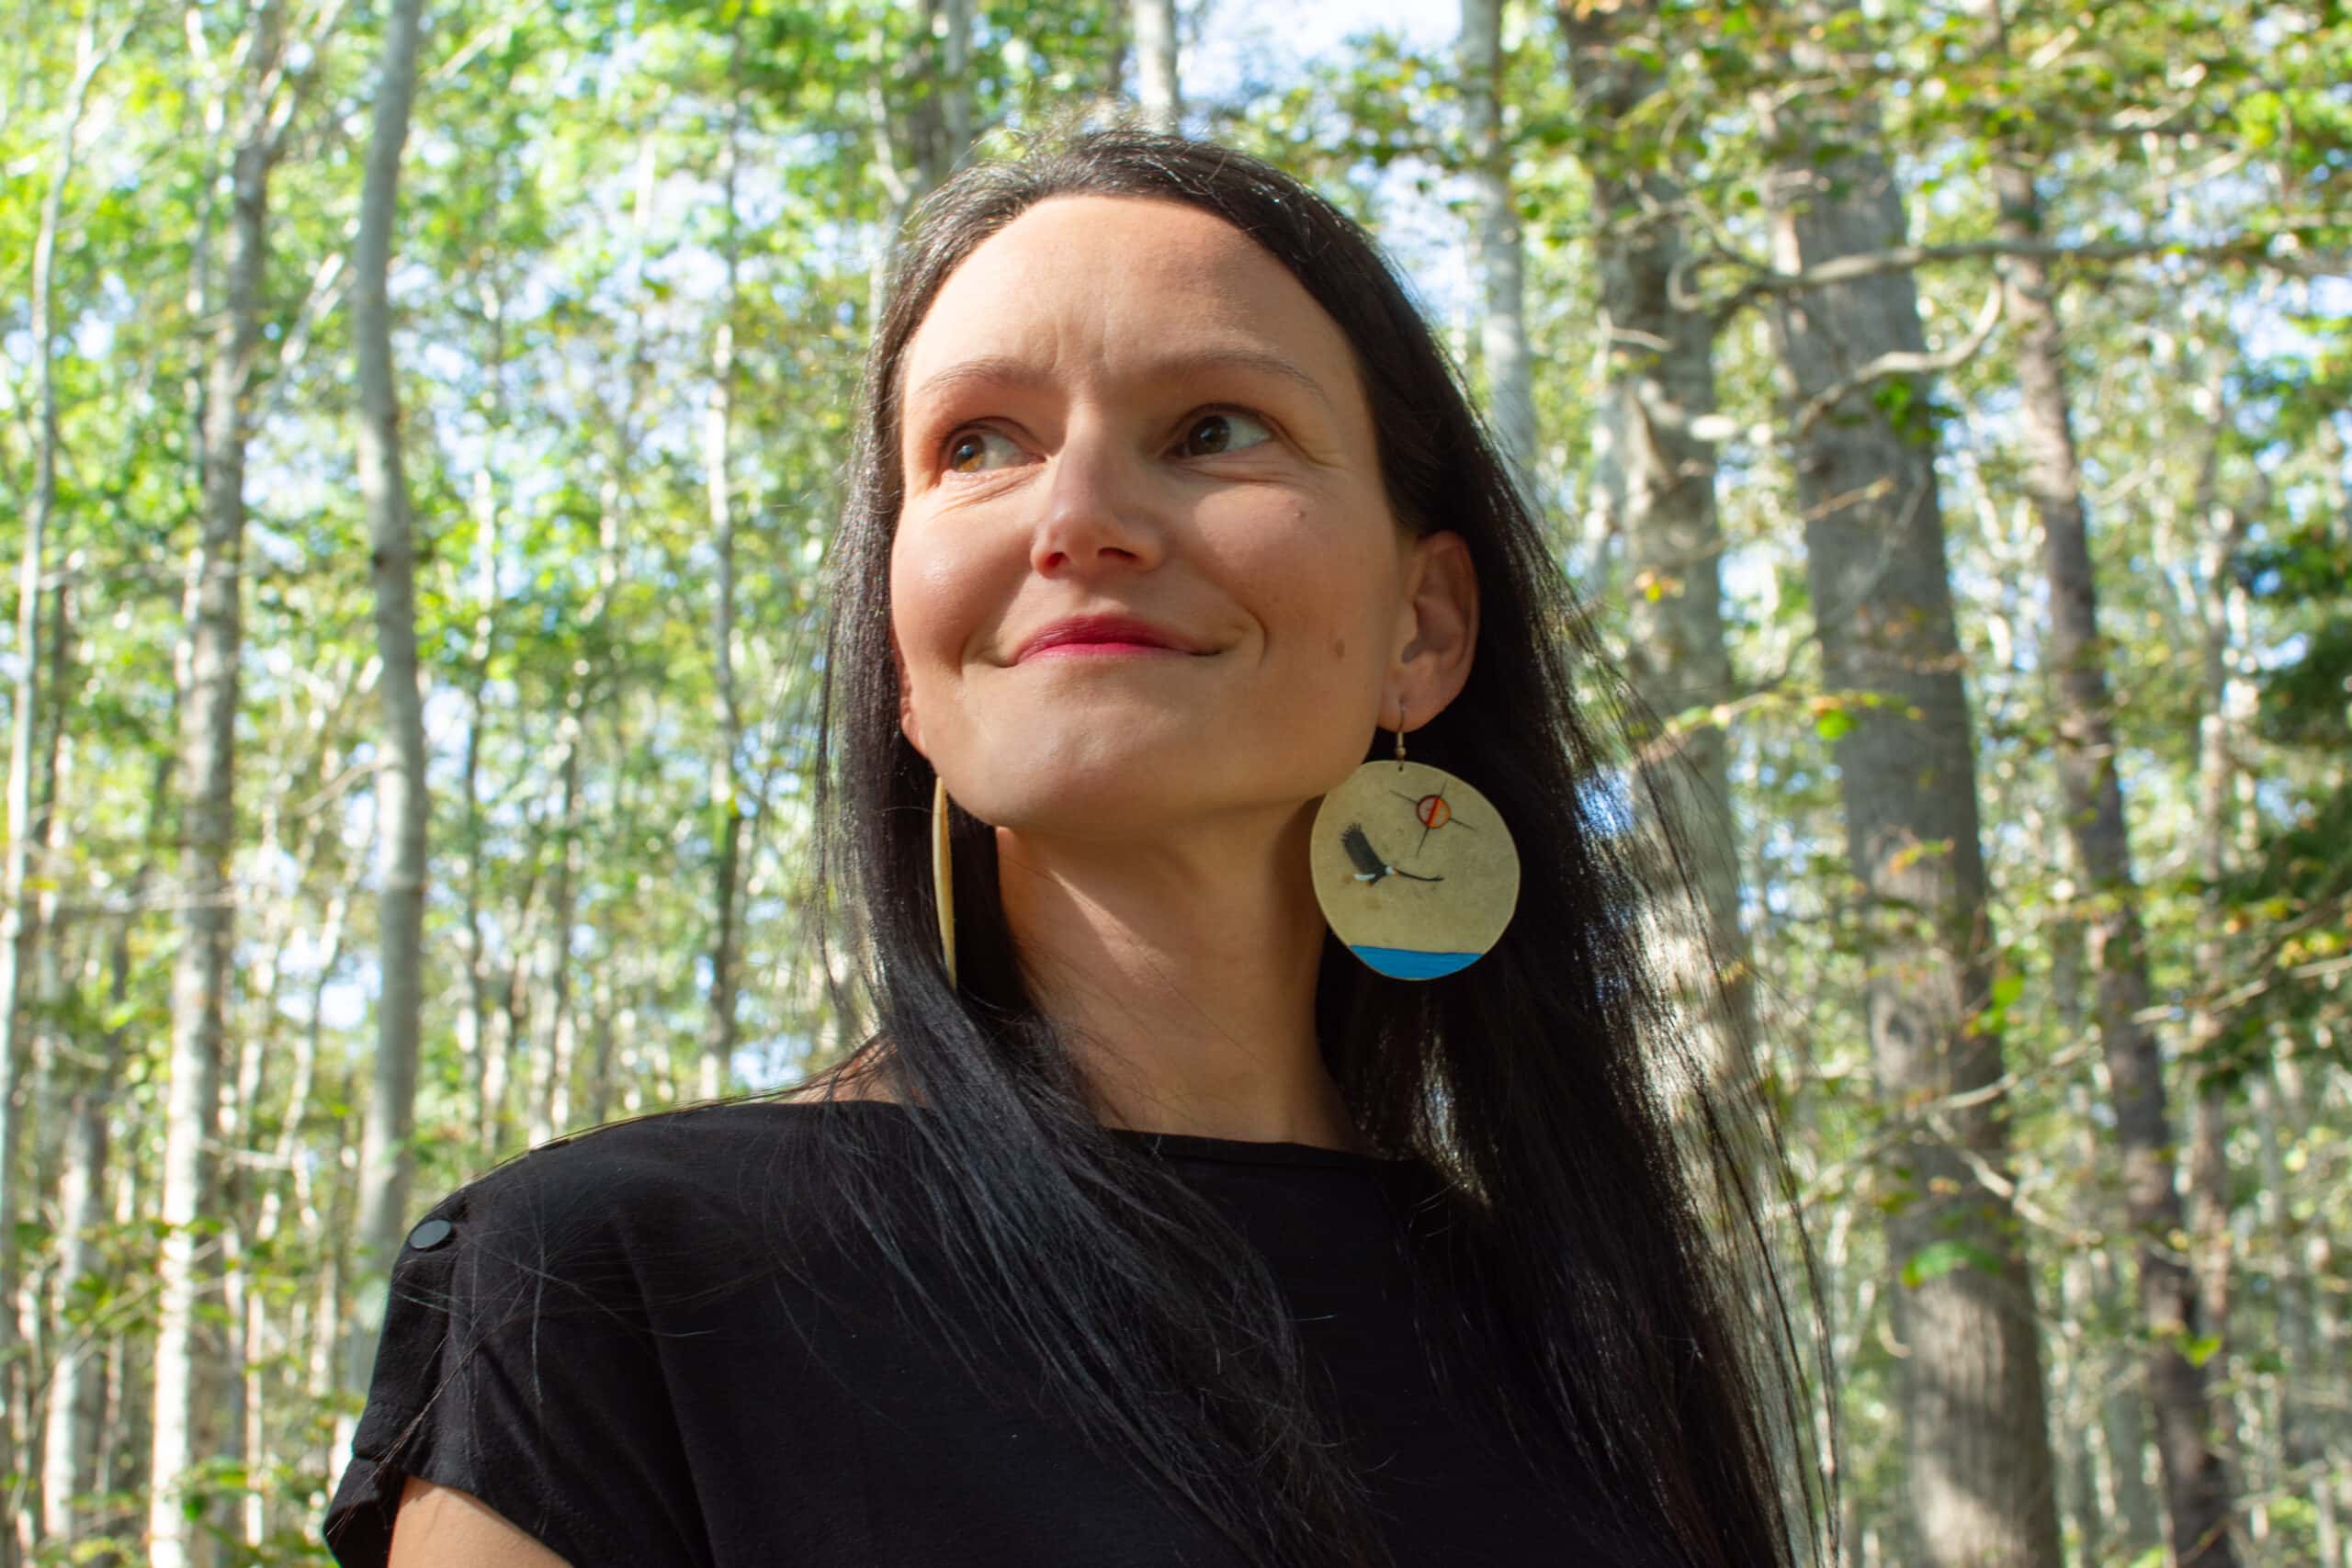 Lisa Neault has long black hair, wears beaded earrings and stands in a forest